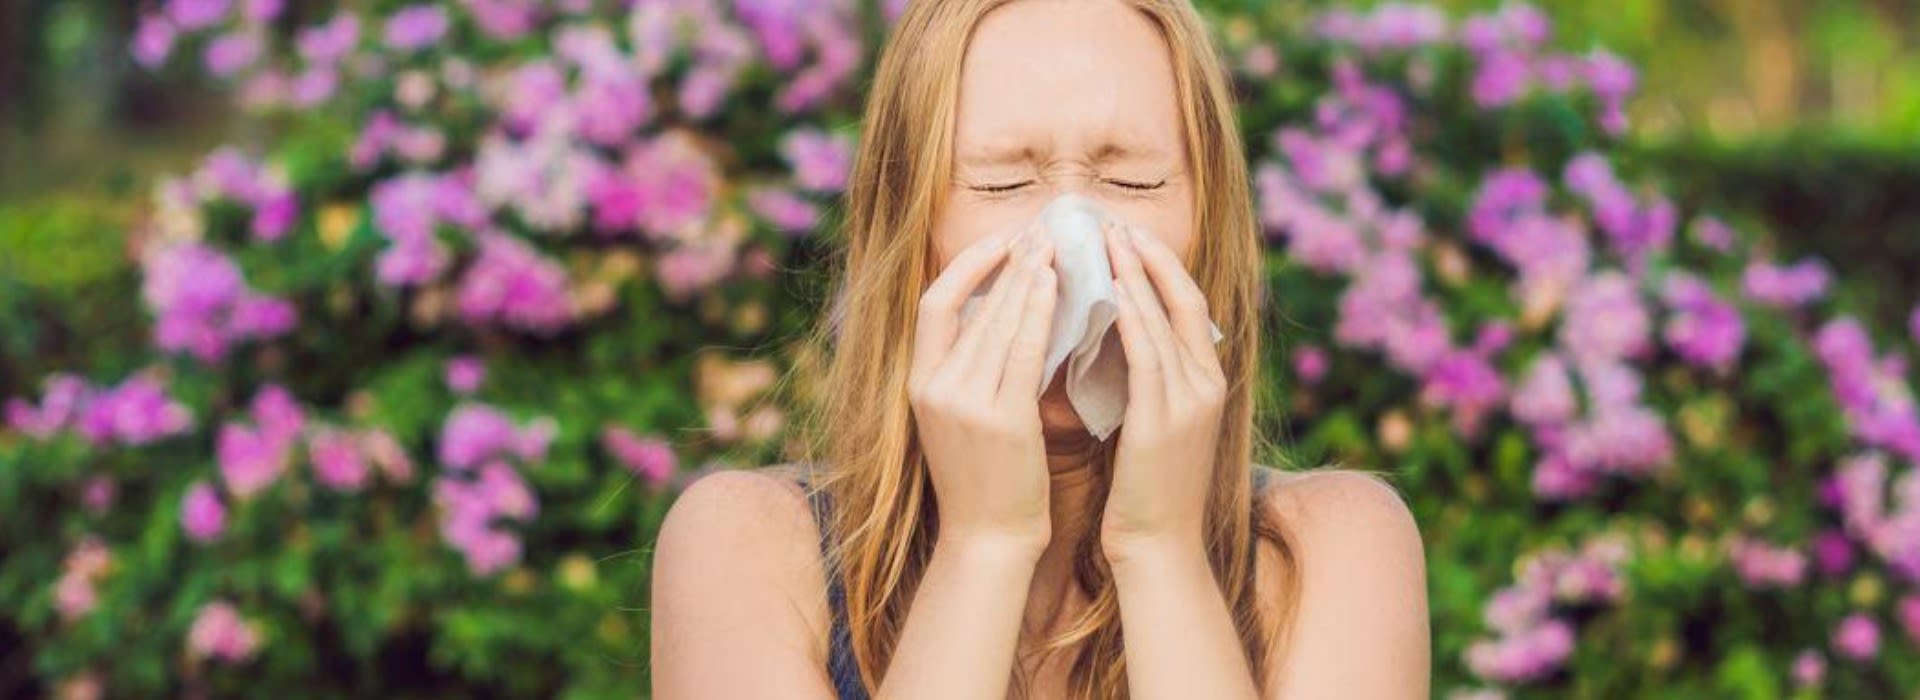 Stay Healthy During the Spring Allergy Season